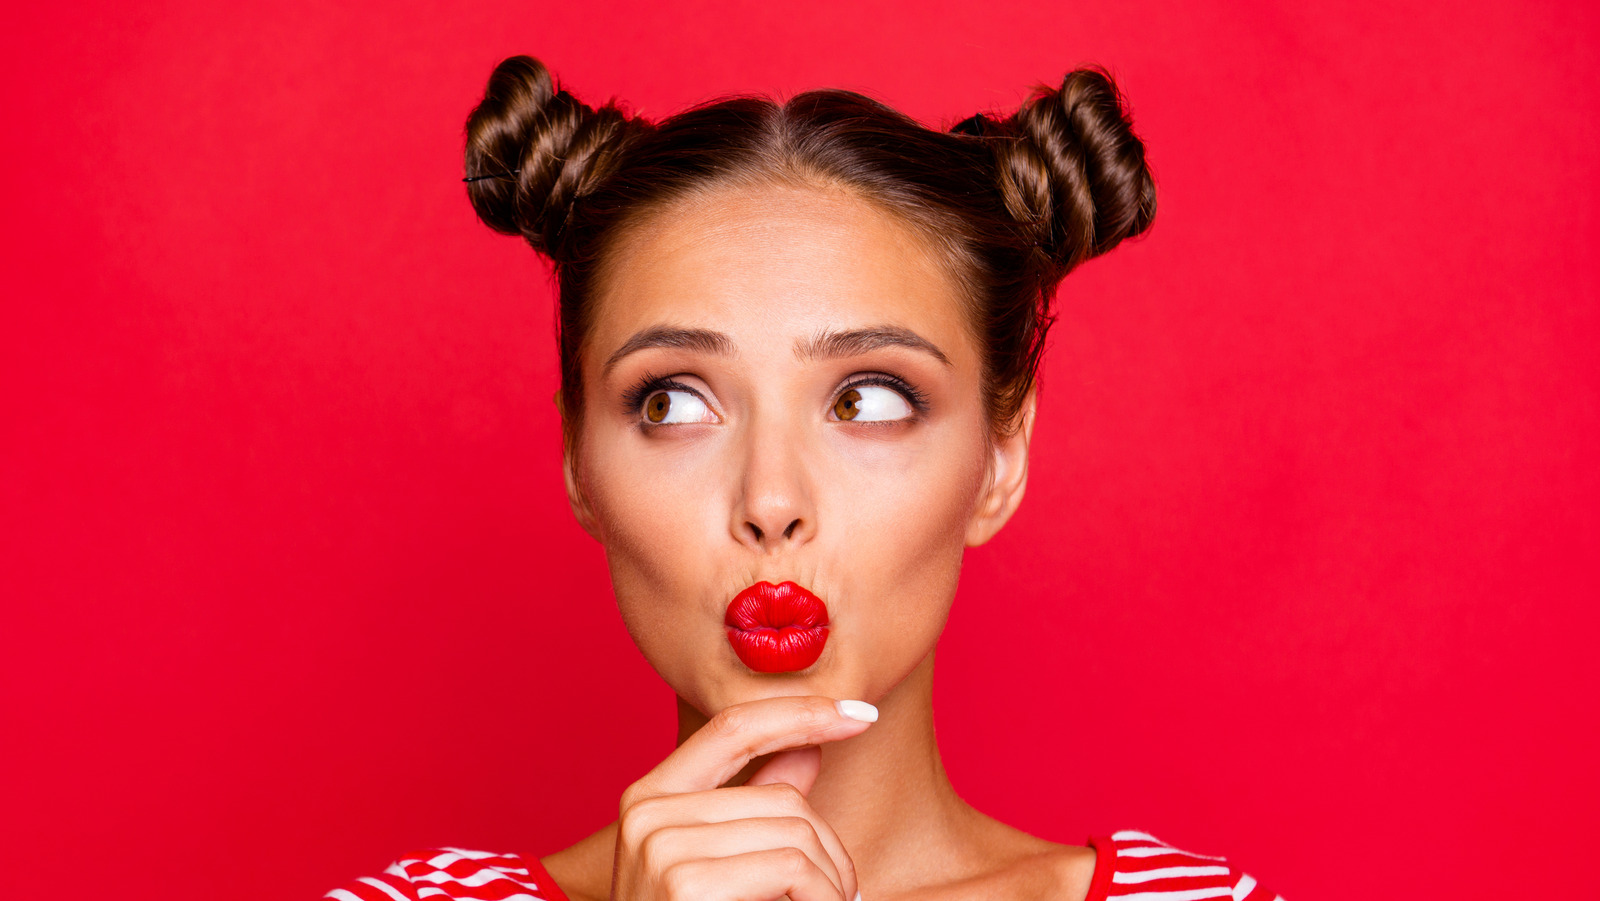 Here's The Fool-Proof Way To Do A Space Buns Hairstyle